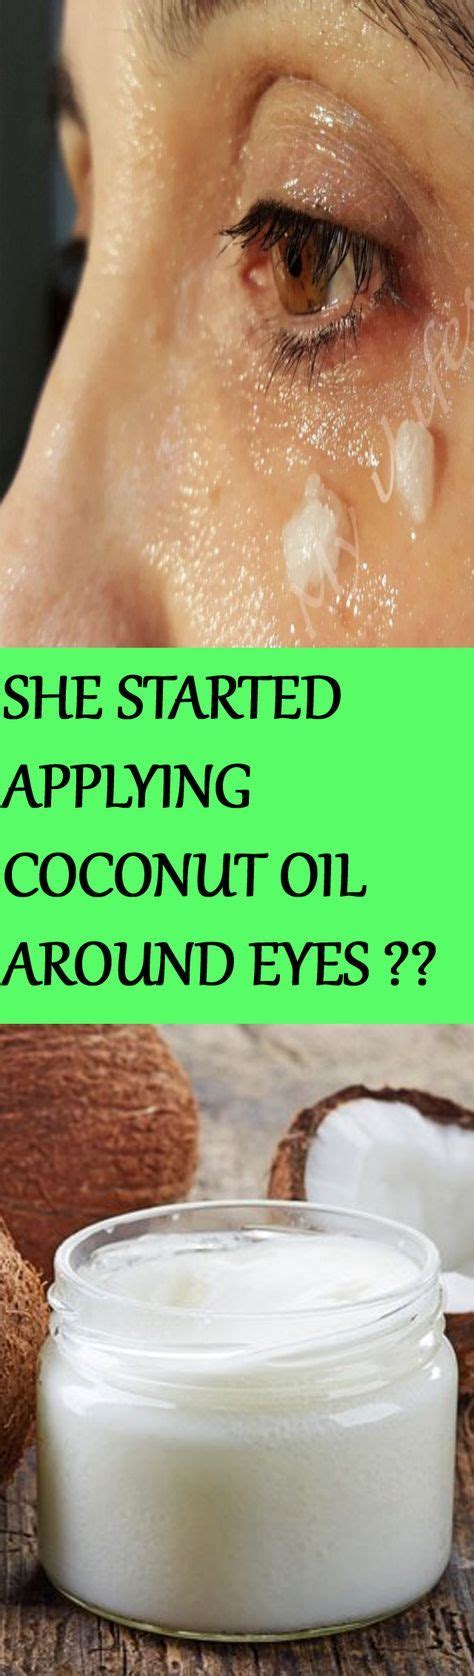 She Started Applying Coconut Oil Around Her Eyes 5 Minutes Later